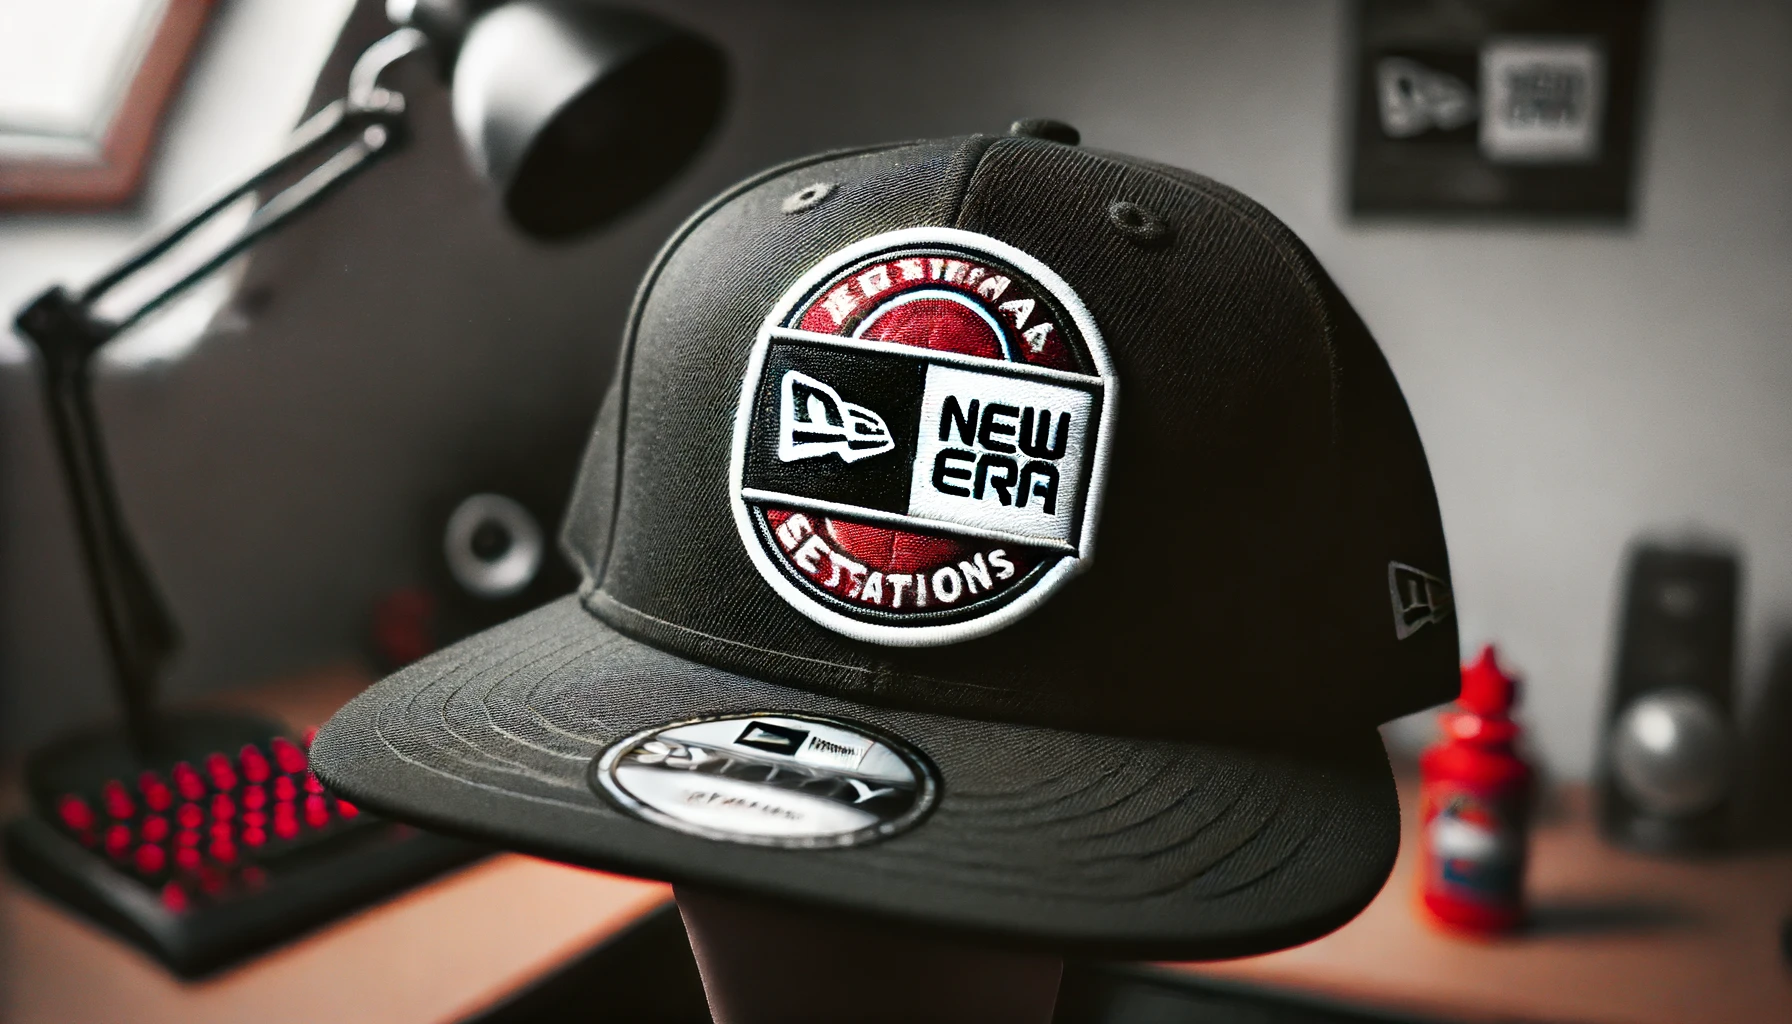 A New Era cap with the iconic sticker on the brim, prominently displayed. The cap is positioned to clearly show the sticker.